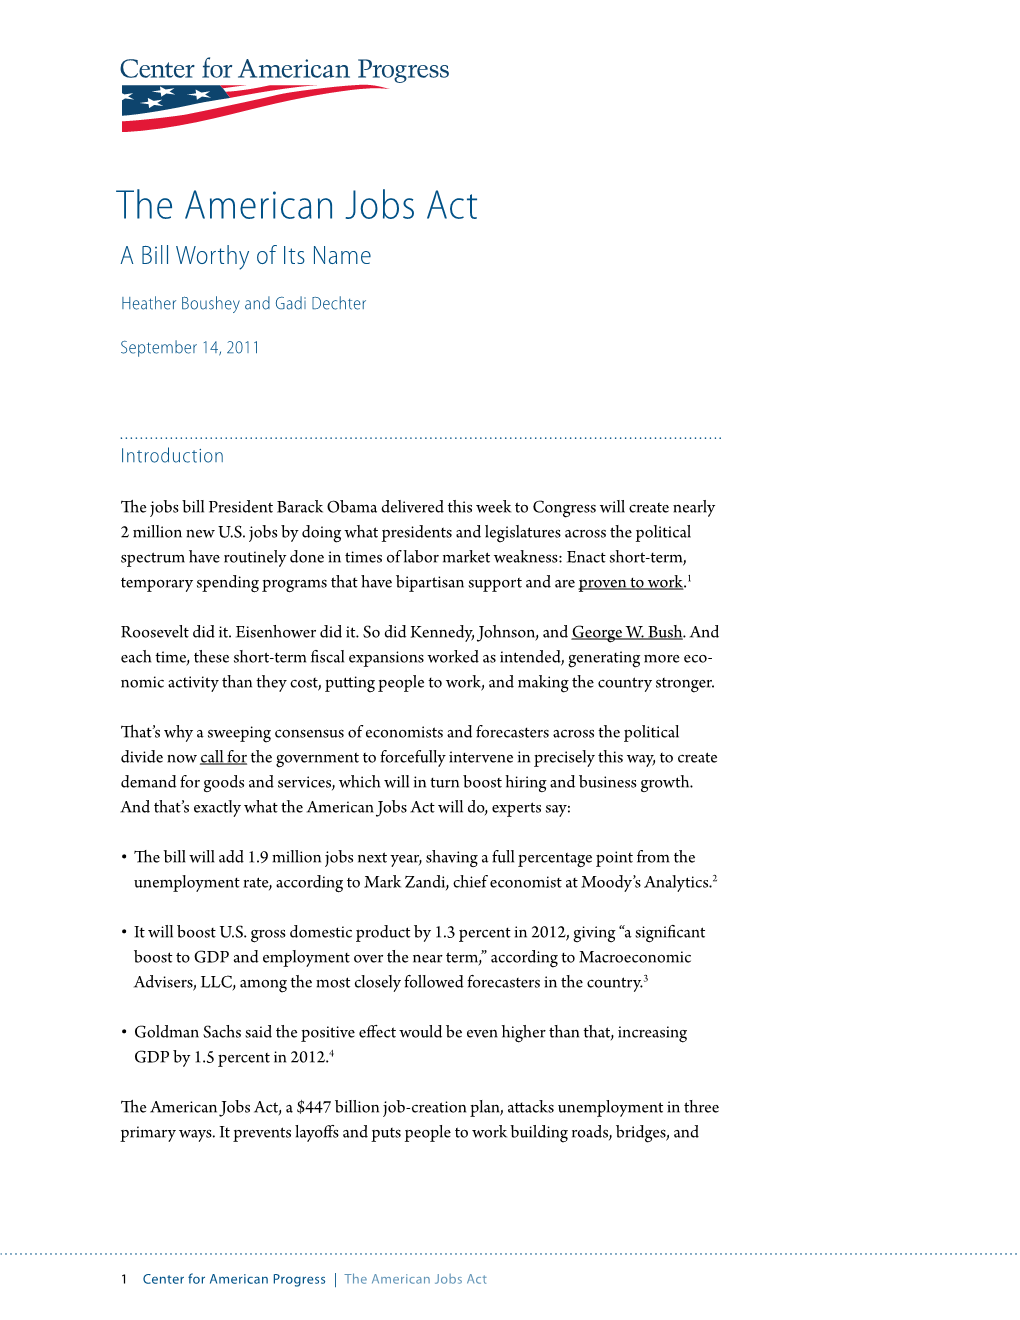 The American Jobs Act a Bill Worthy of Its Name